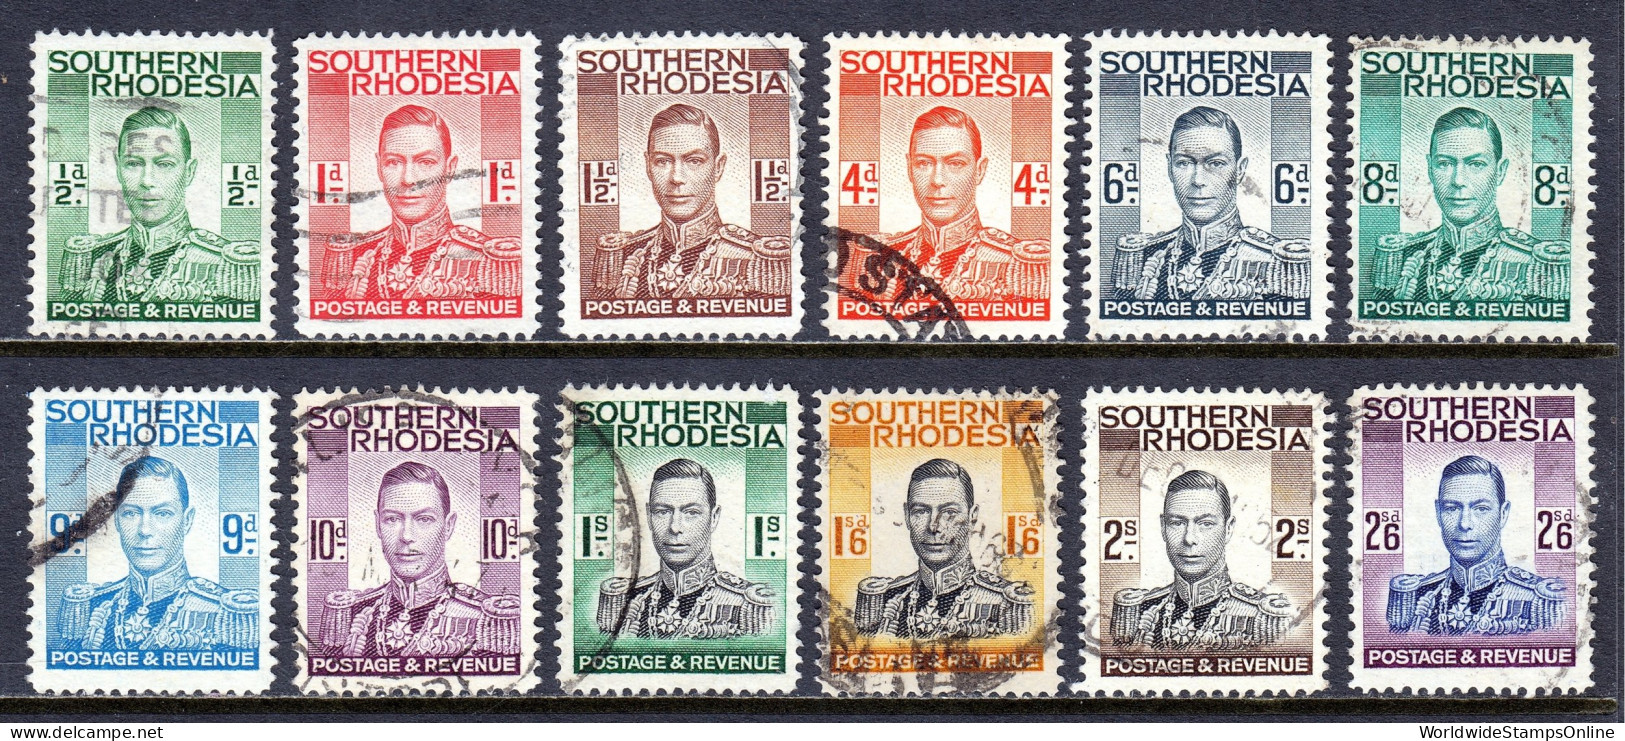 Southern Rhodesia - Scott #42//53 - Used - Short Set Of 12 - SCV $22 - Rodesia Del Sur (...-1964)